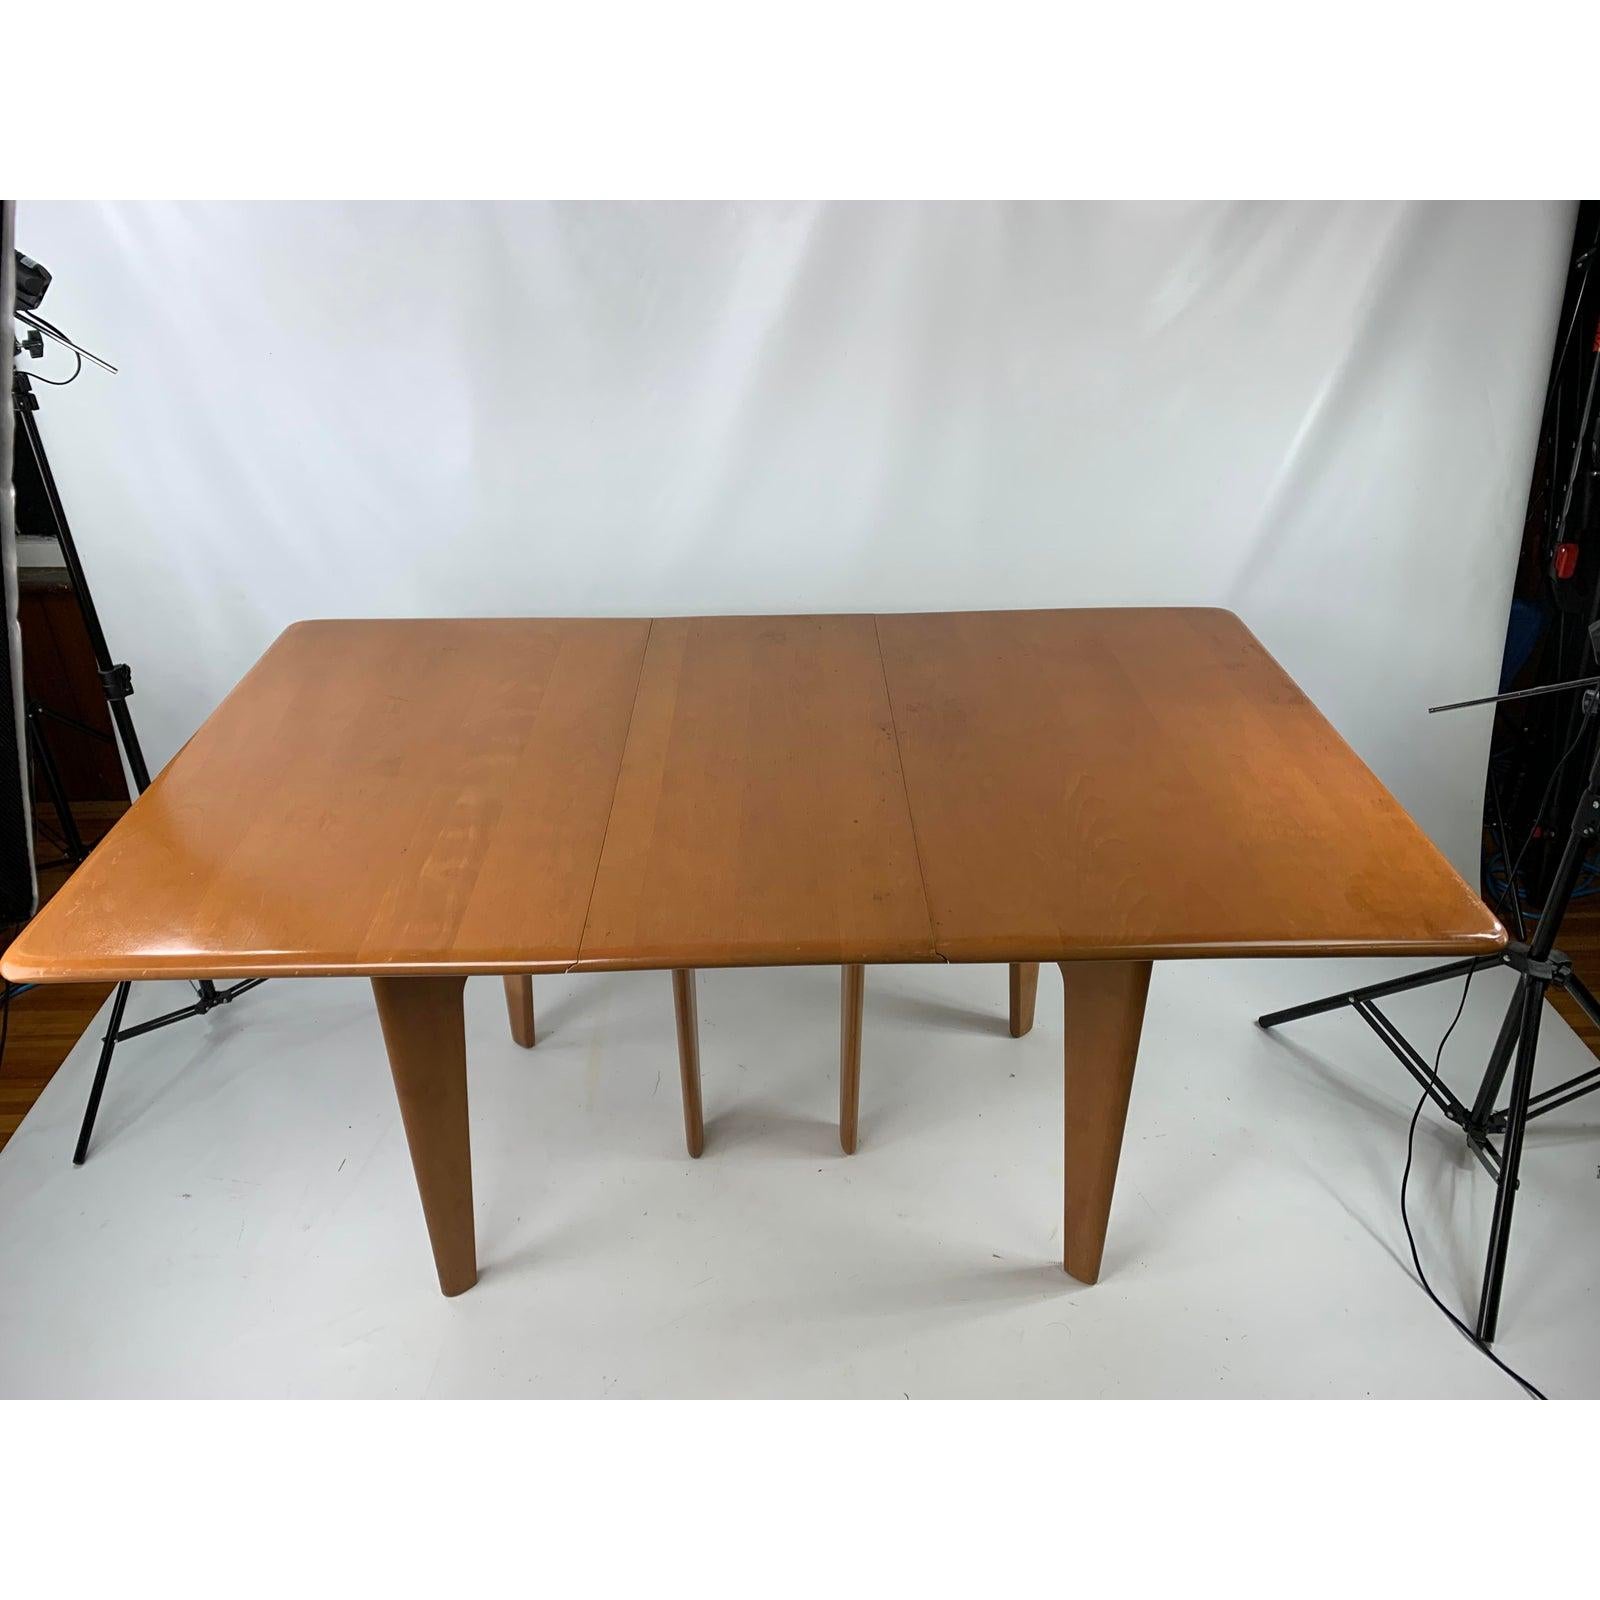 Mid-century Heywood Wakefield drop leaf dining table. Table is in classic champagne finish. Tables width when closed is 16”.